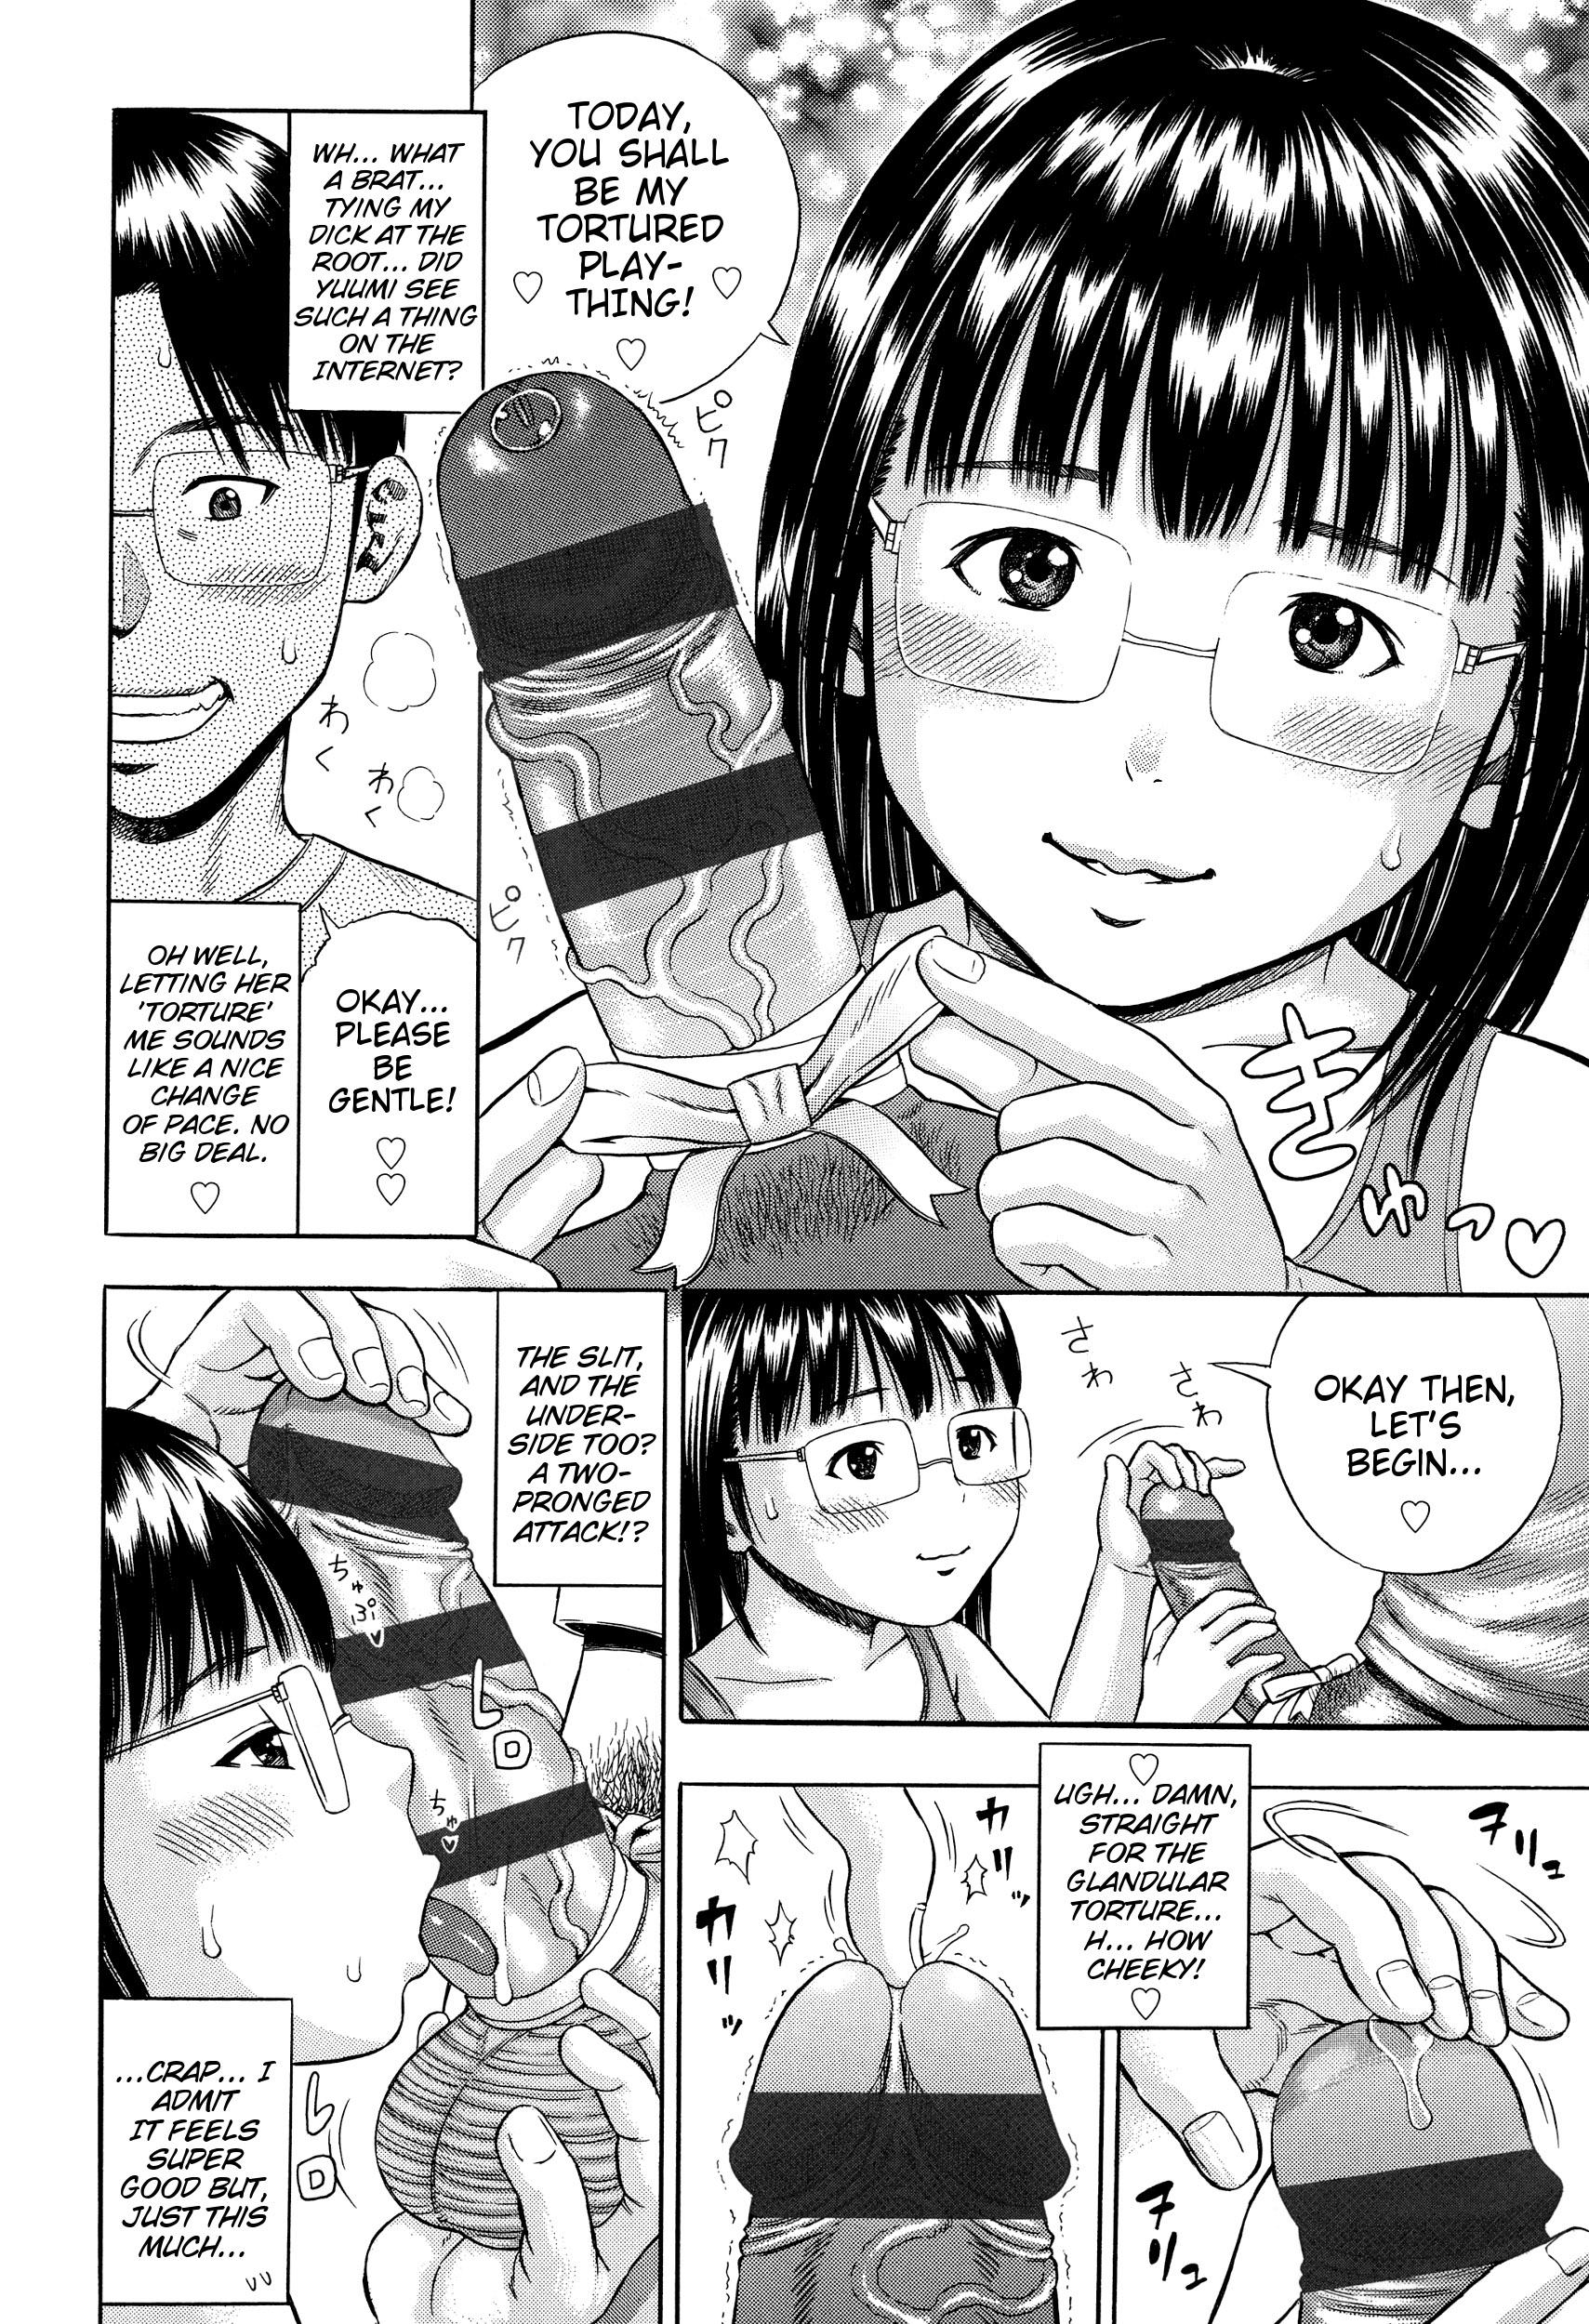 Nasty Free Porn Uchi no Imouto ga Warito Kawaii | My Little Sister Is Relatively Cute Rimjob - Page 12